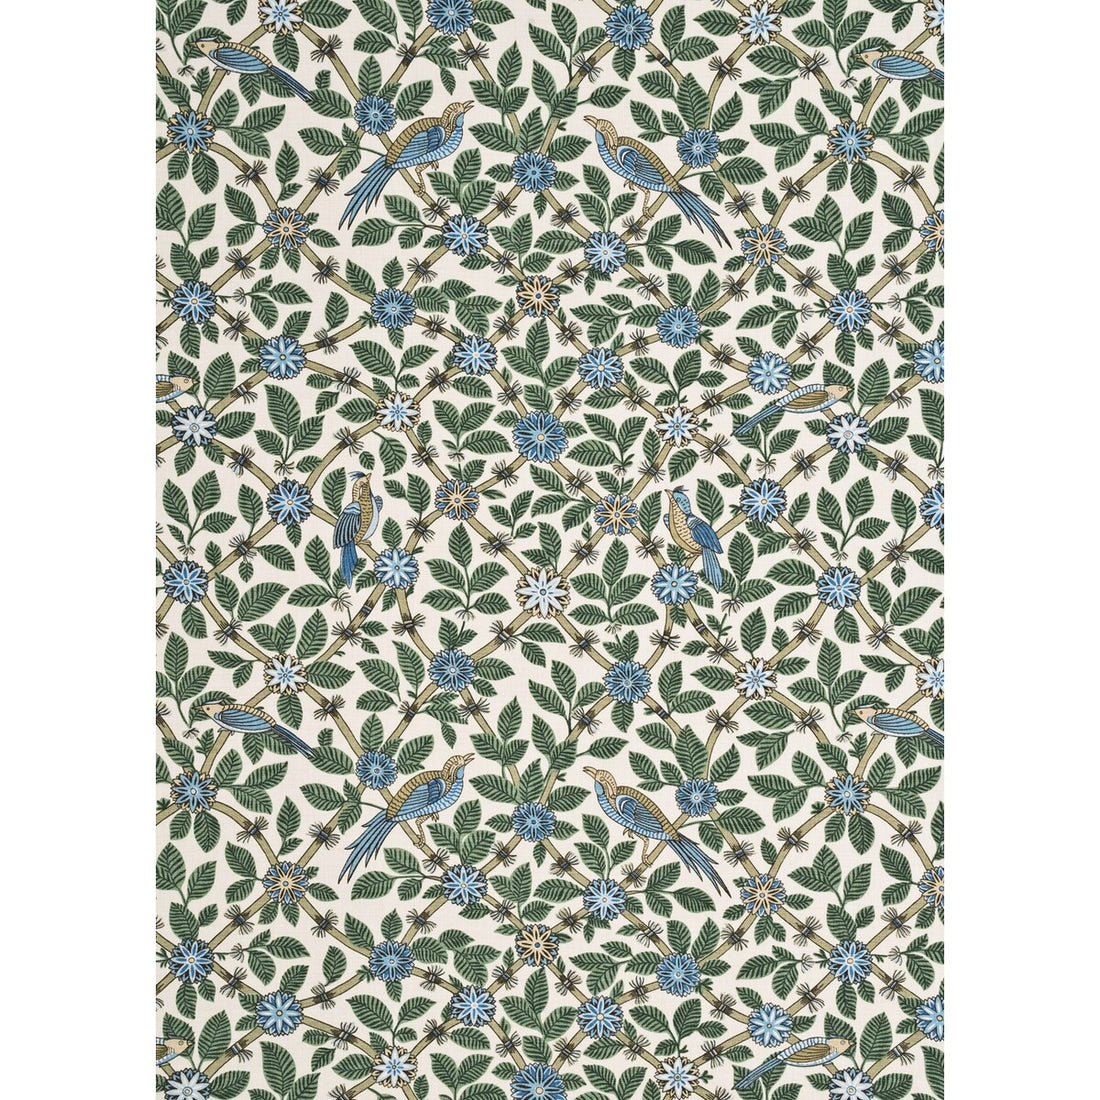 Bamboo Bird fabric in aqua/teal color - pattern BP10465.2.0 - by G P &amp; J Baker in the Crayford collection